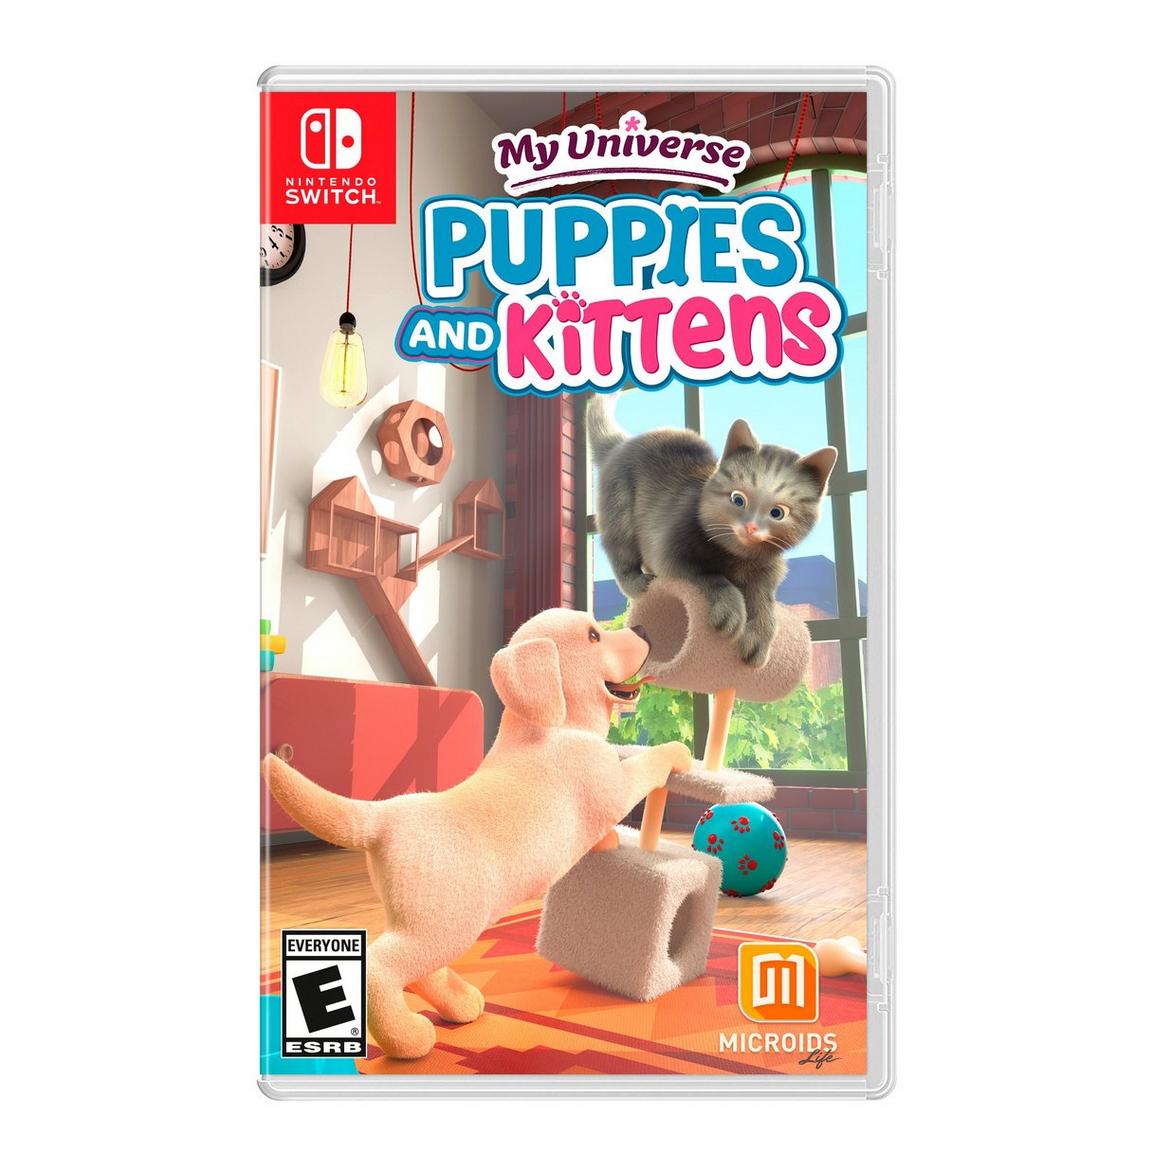 My Universe: Puppies and Kittens - Nintendo Switch, Pre-Owned